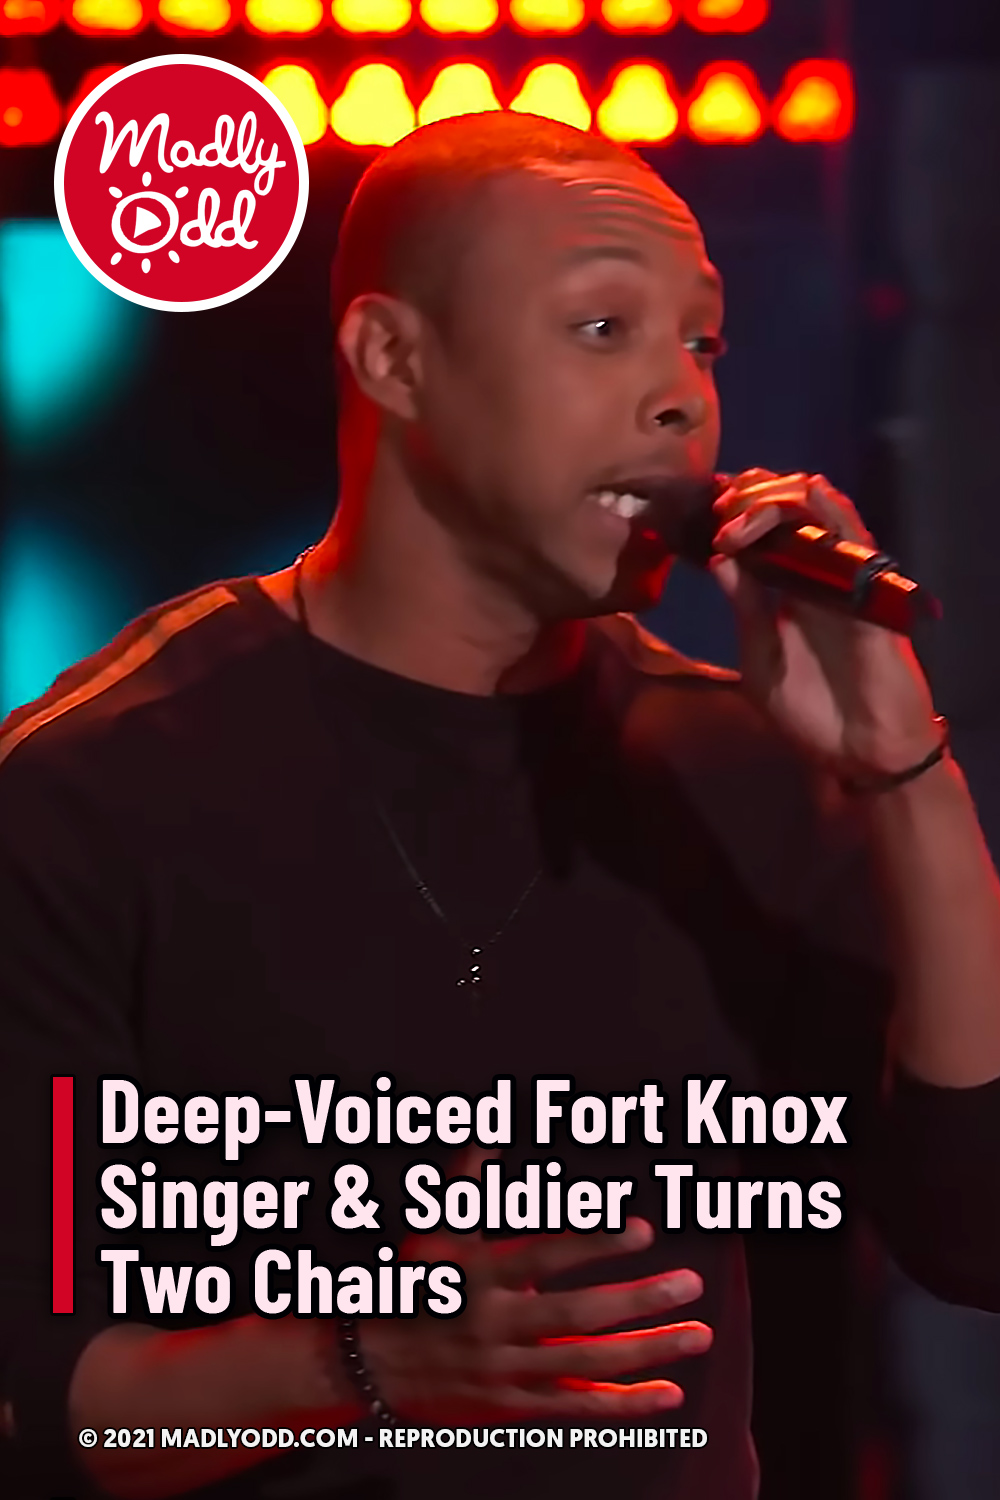 Deep-Voiced Fort Knox Singer & Soldier Turns Two Chairs